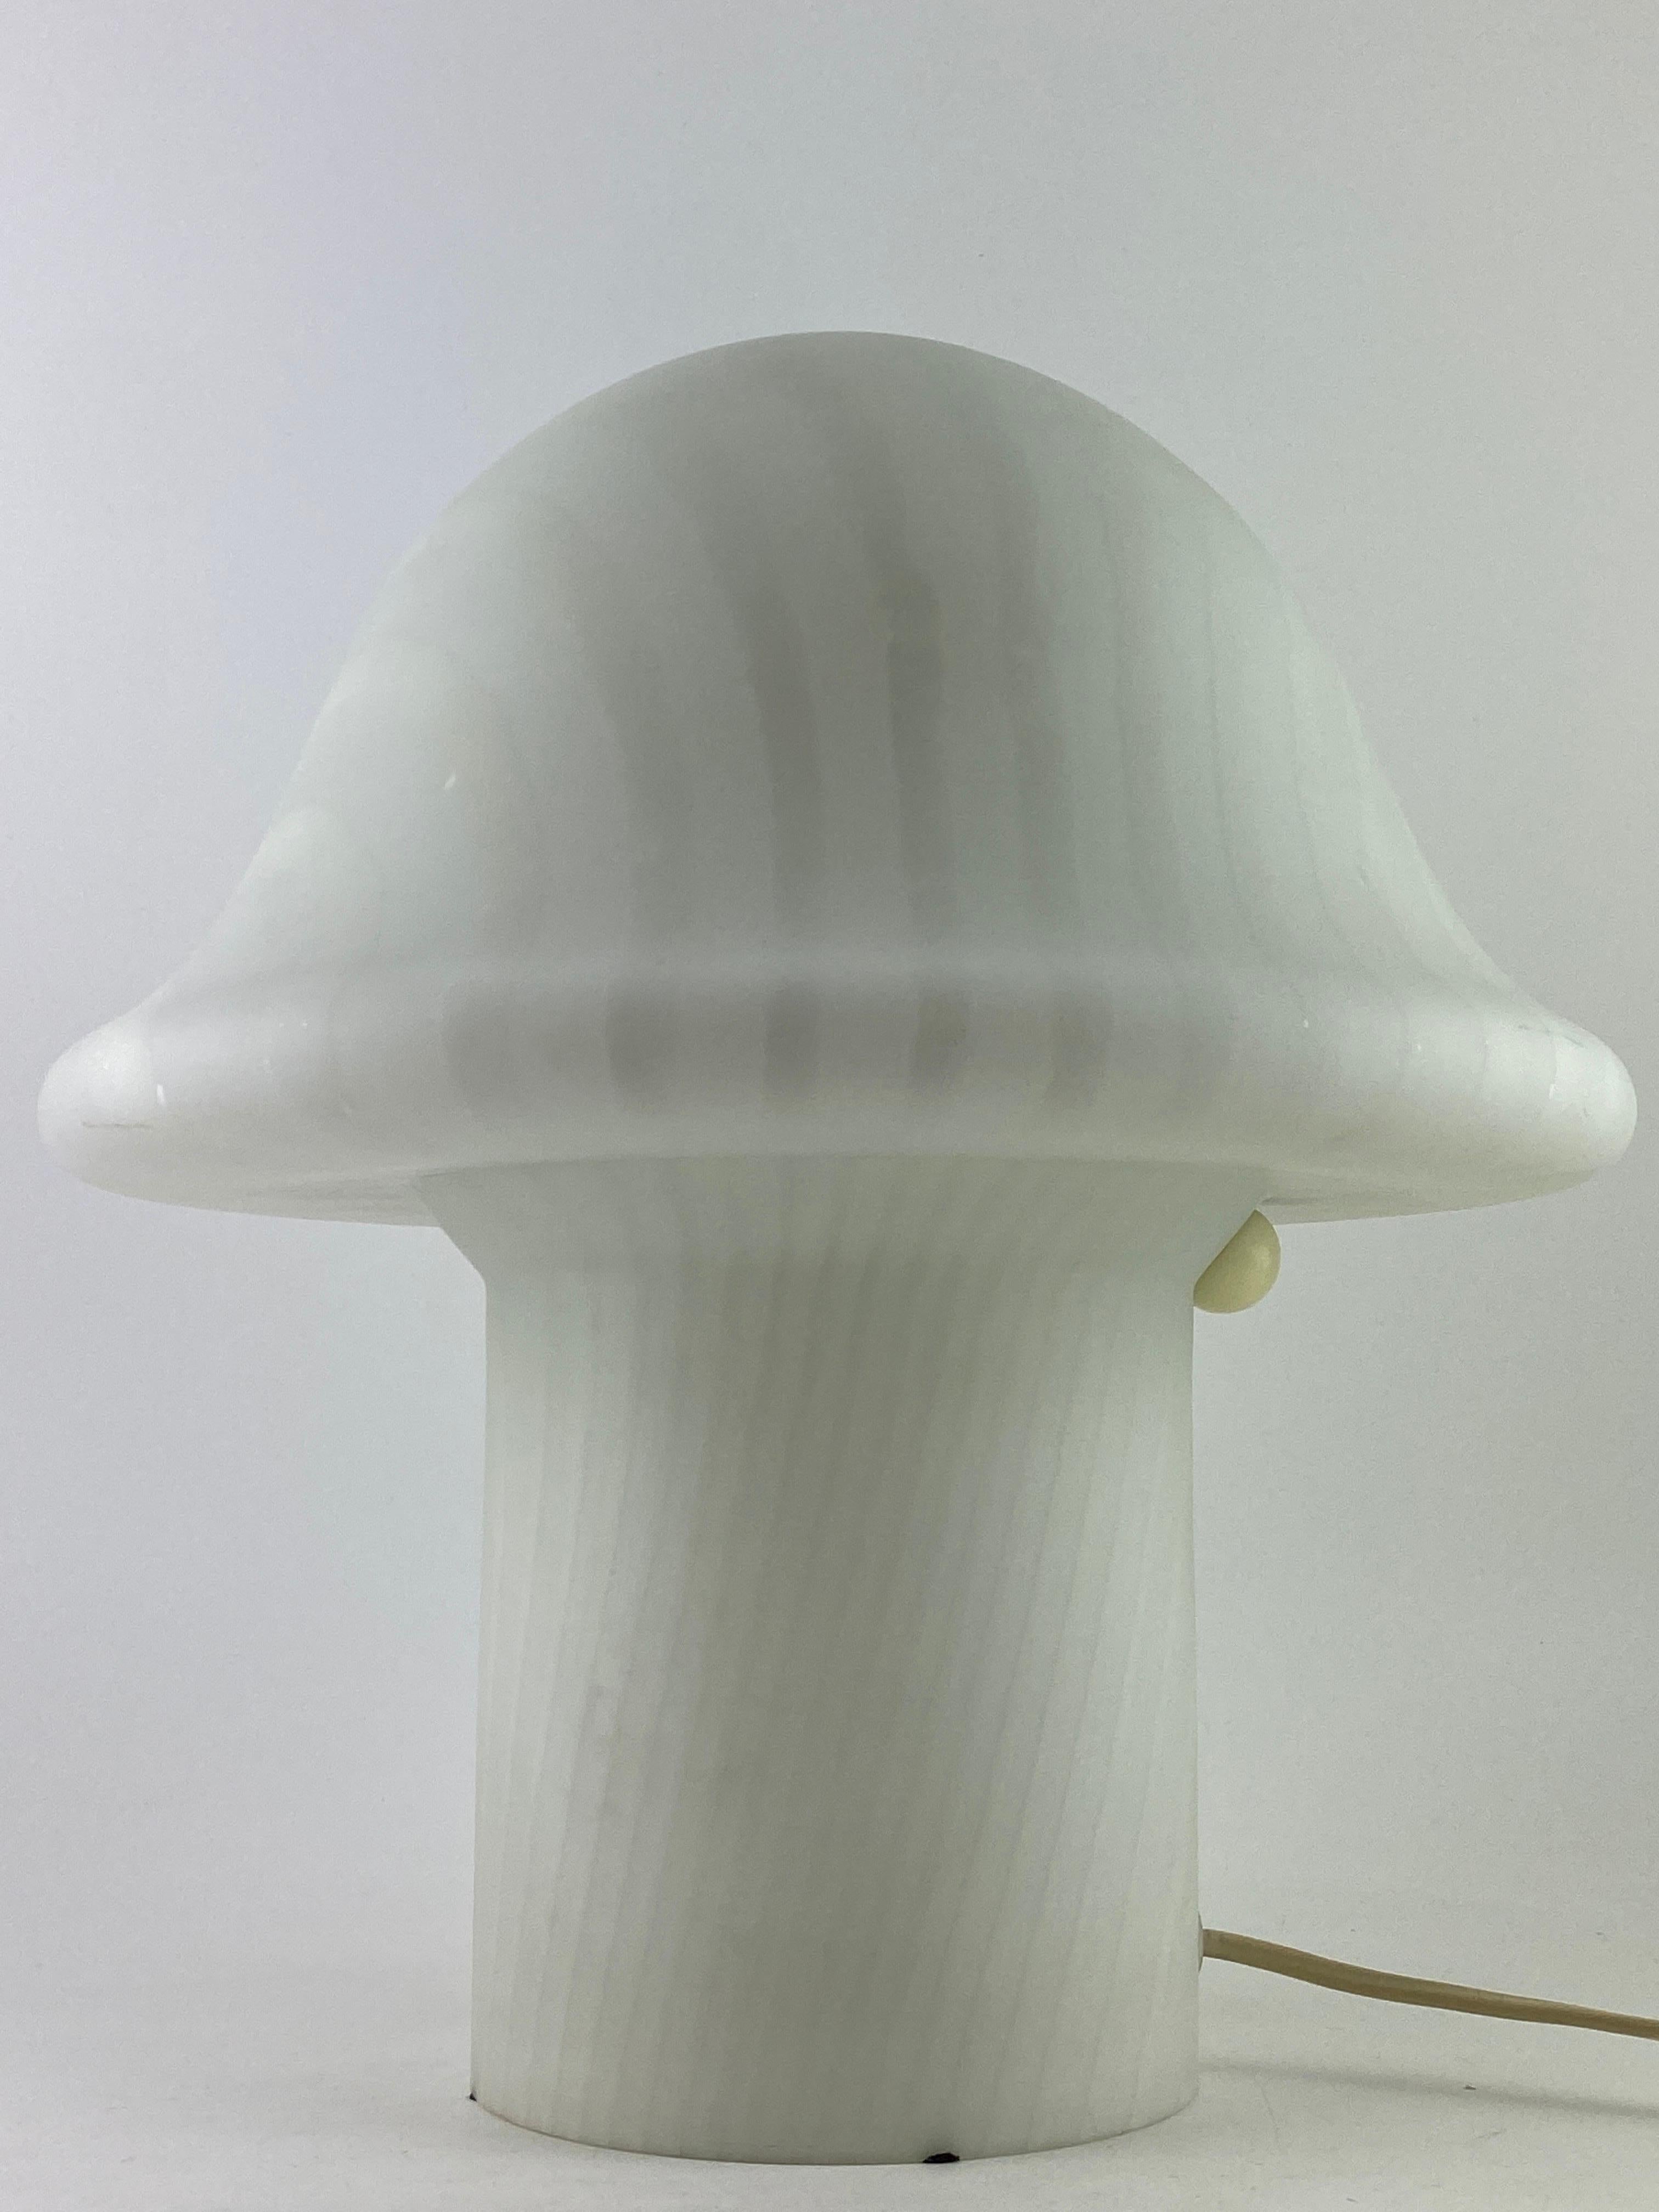 One of two Large White Glass Peill and Putzler Mushroom Table Lamp XL 1970 For Sale 3